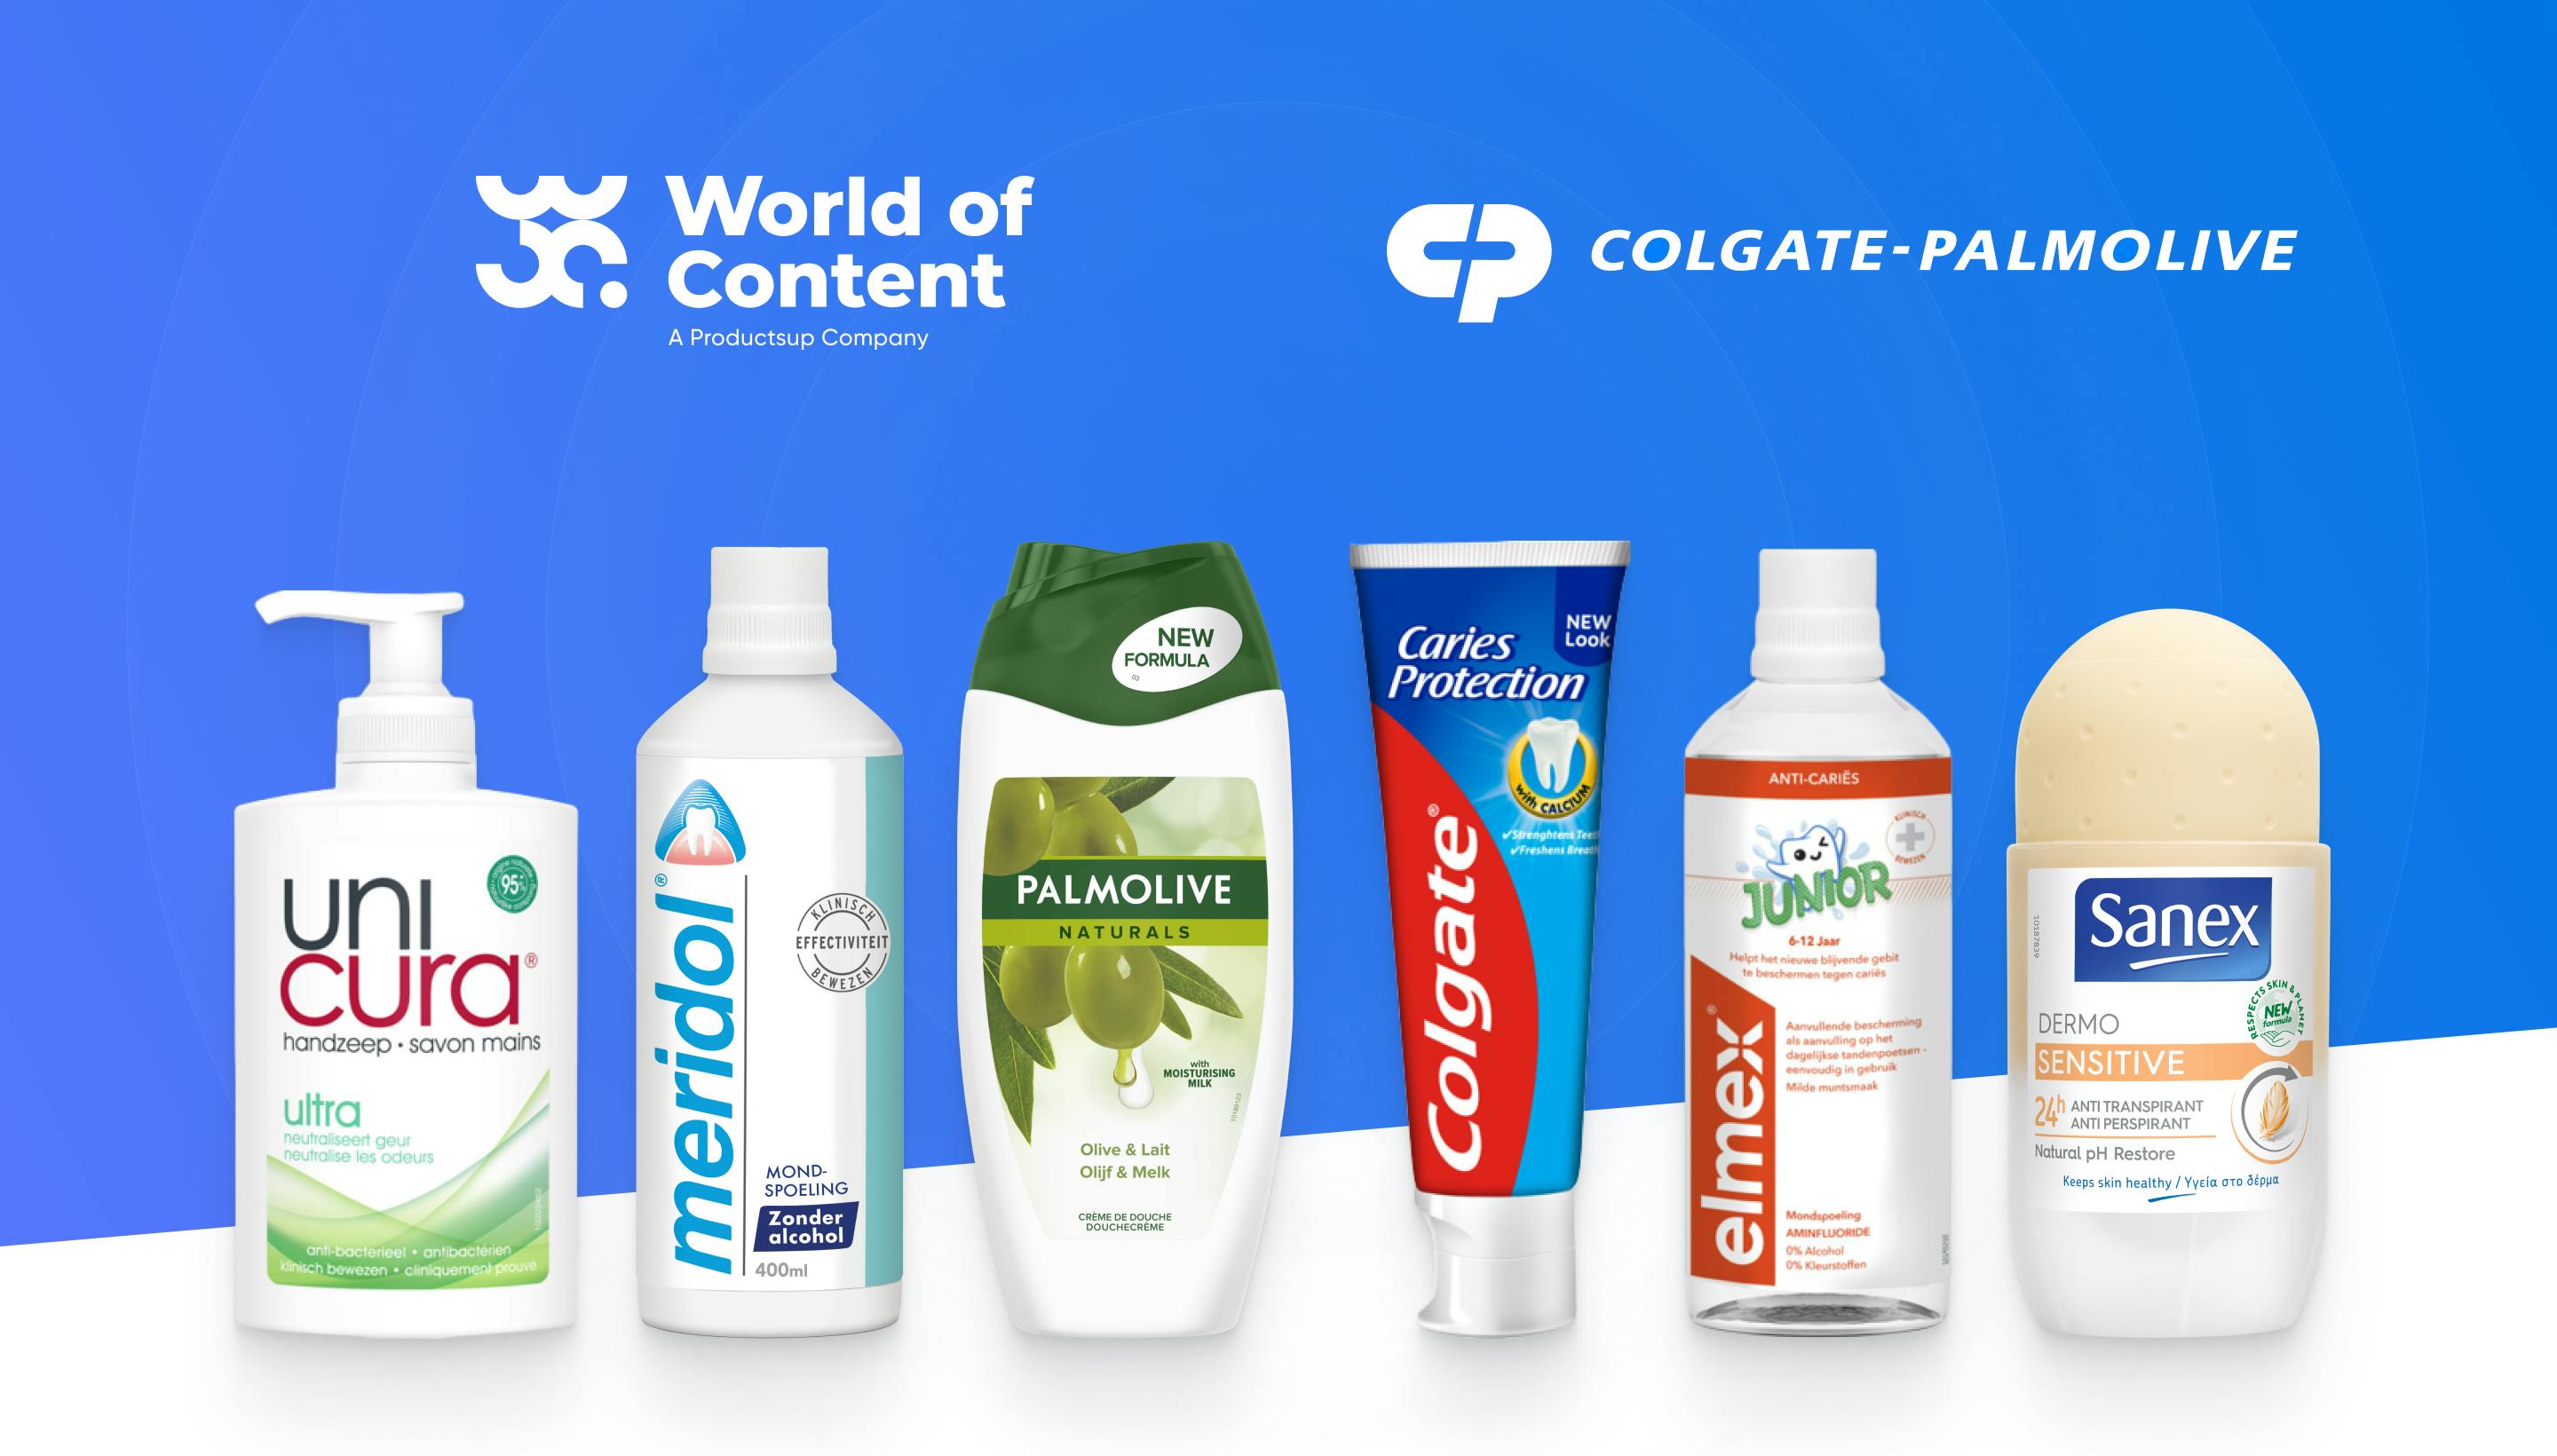 World of Content and Colgate-Palmolive